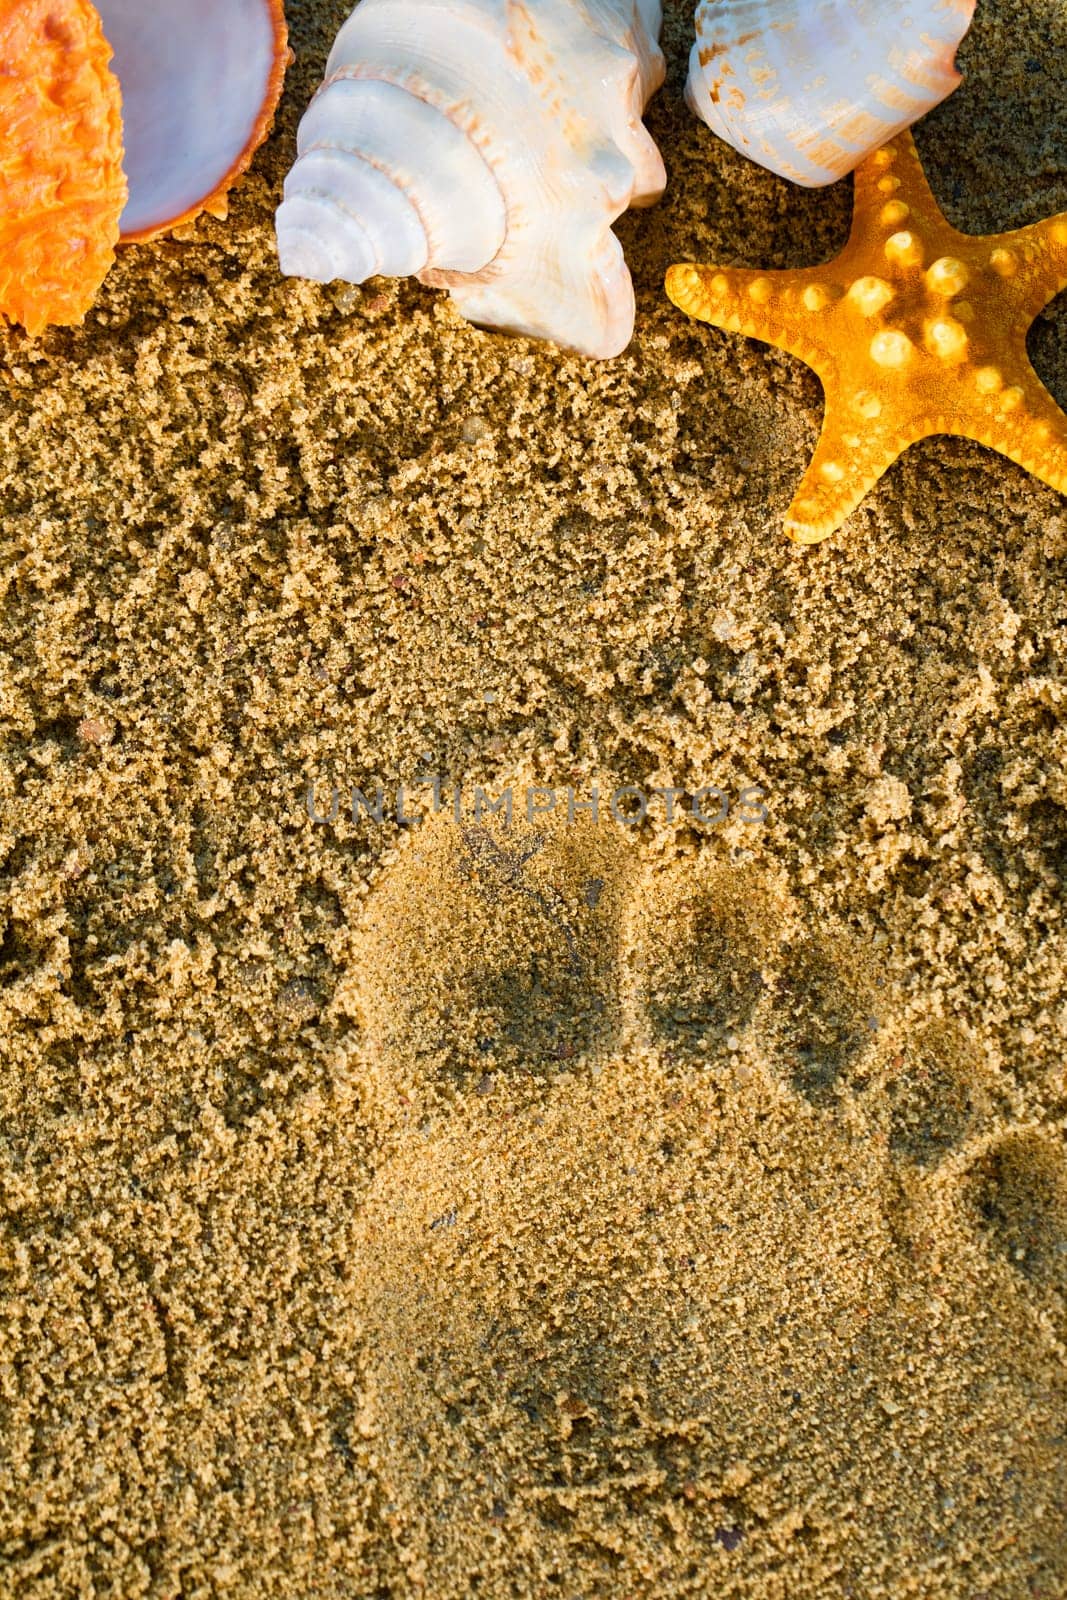 Imprinted footprint on a beach full of sand and next to it are shells and a starfish. by fotodrobik